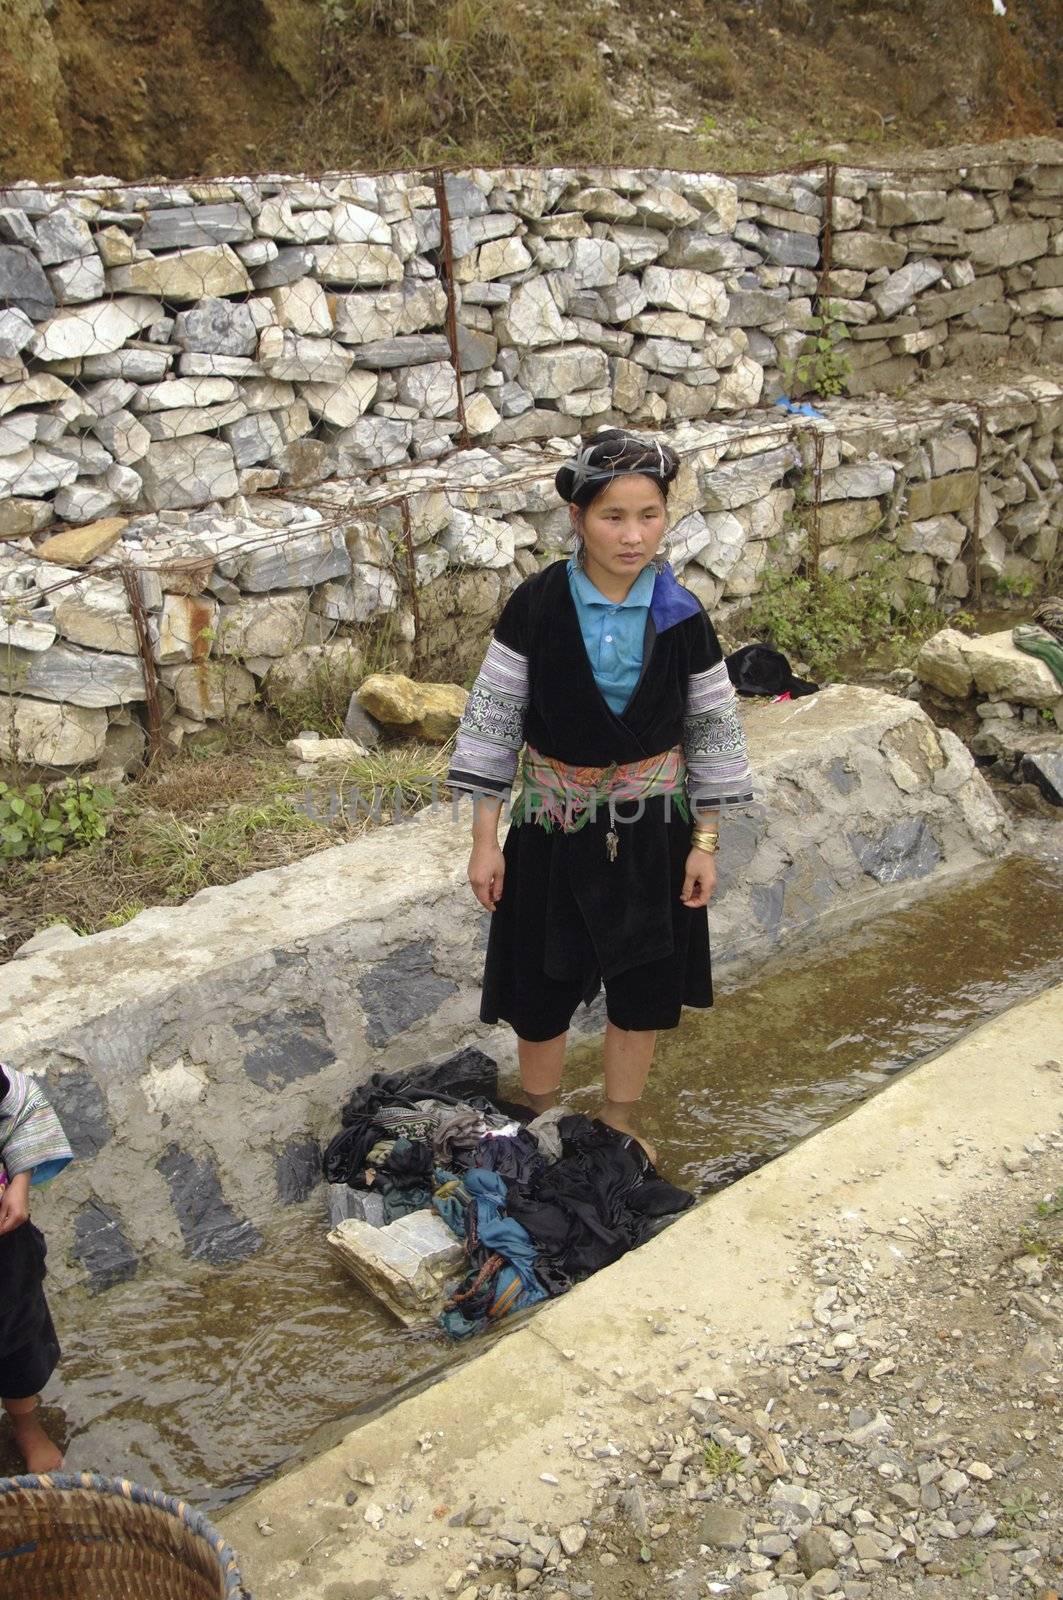 Woman washing clothes in the gutter fed water from the mountain